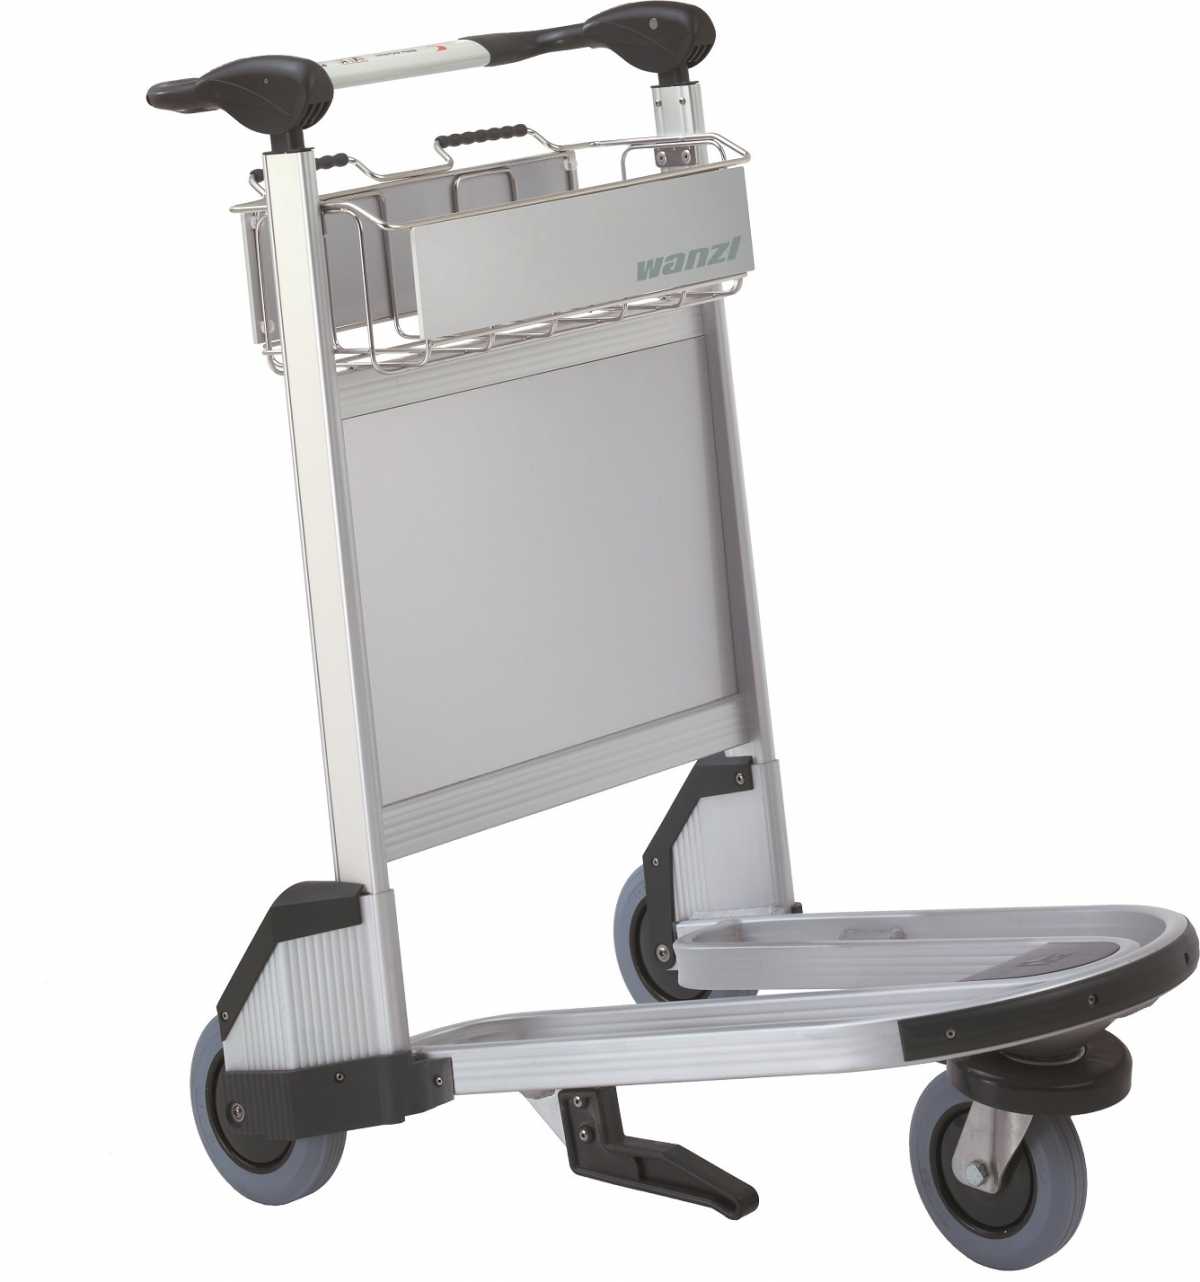 WANZL Luggage Transport Trolley Voyager 3000